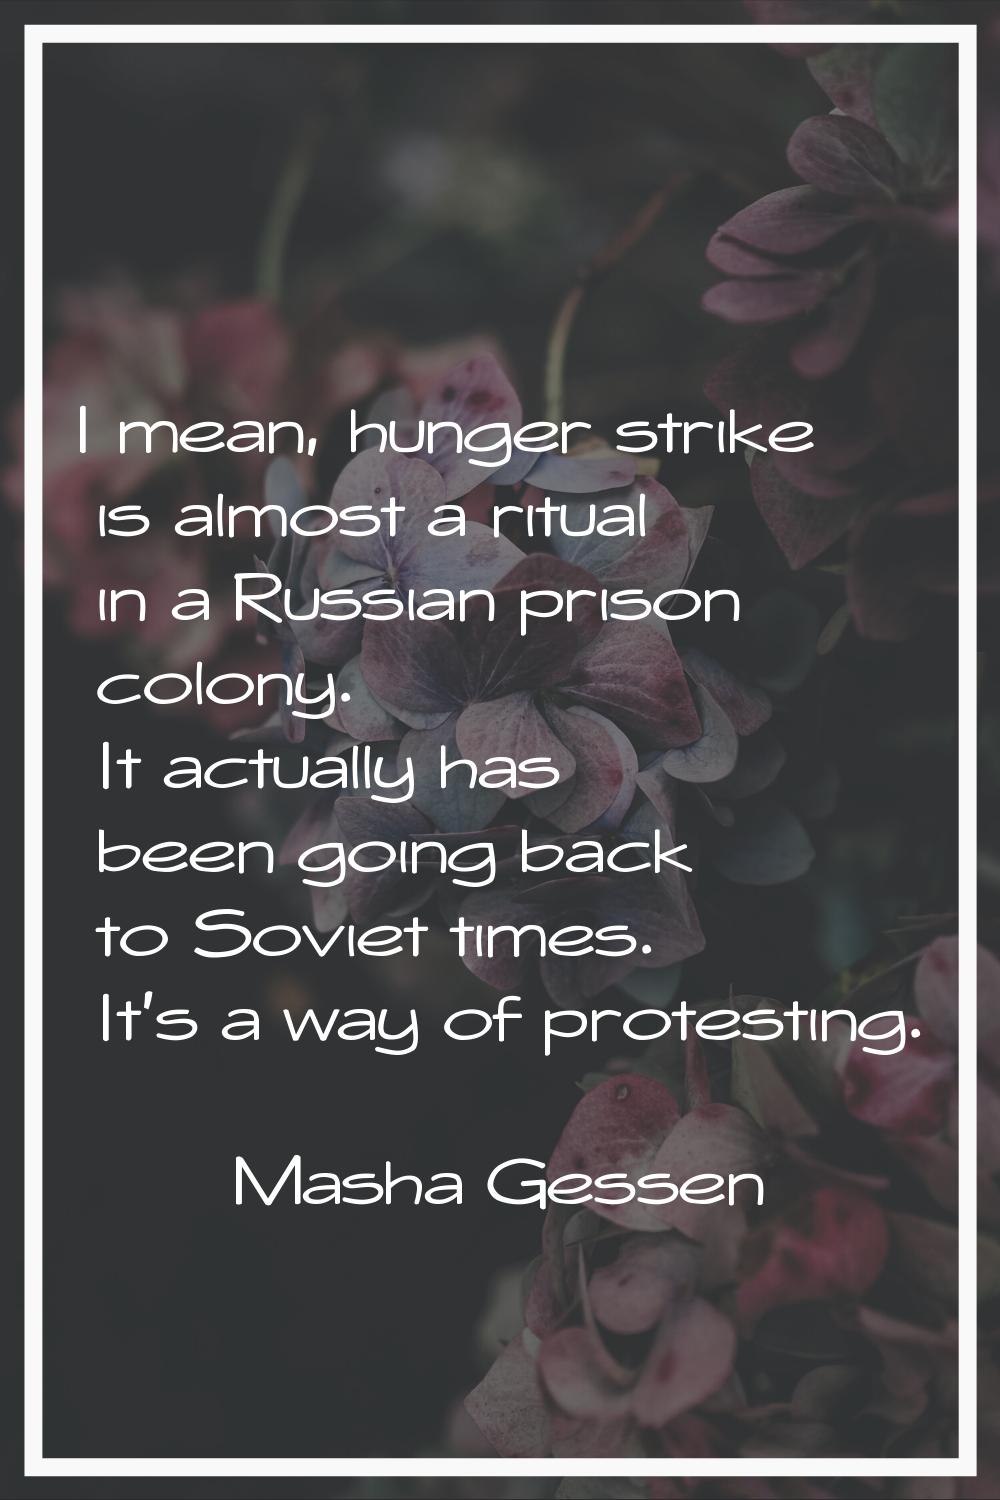 I mean, hunger strike is almost a ritual in a Russian prison colony. It actually has been going bac